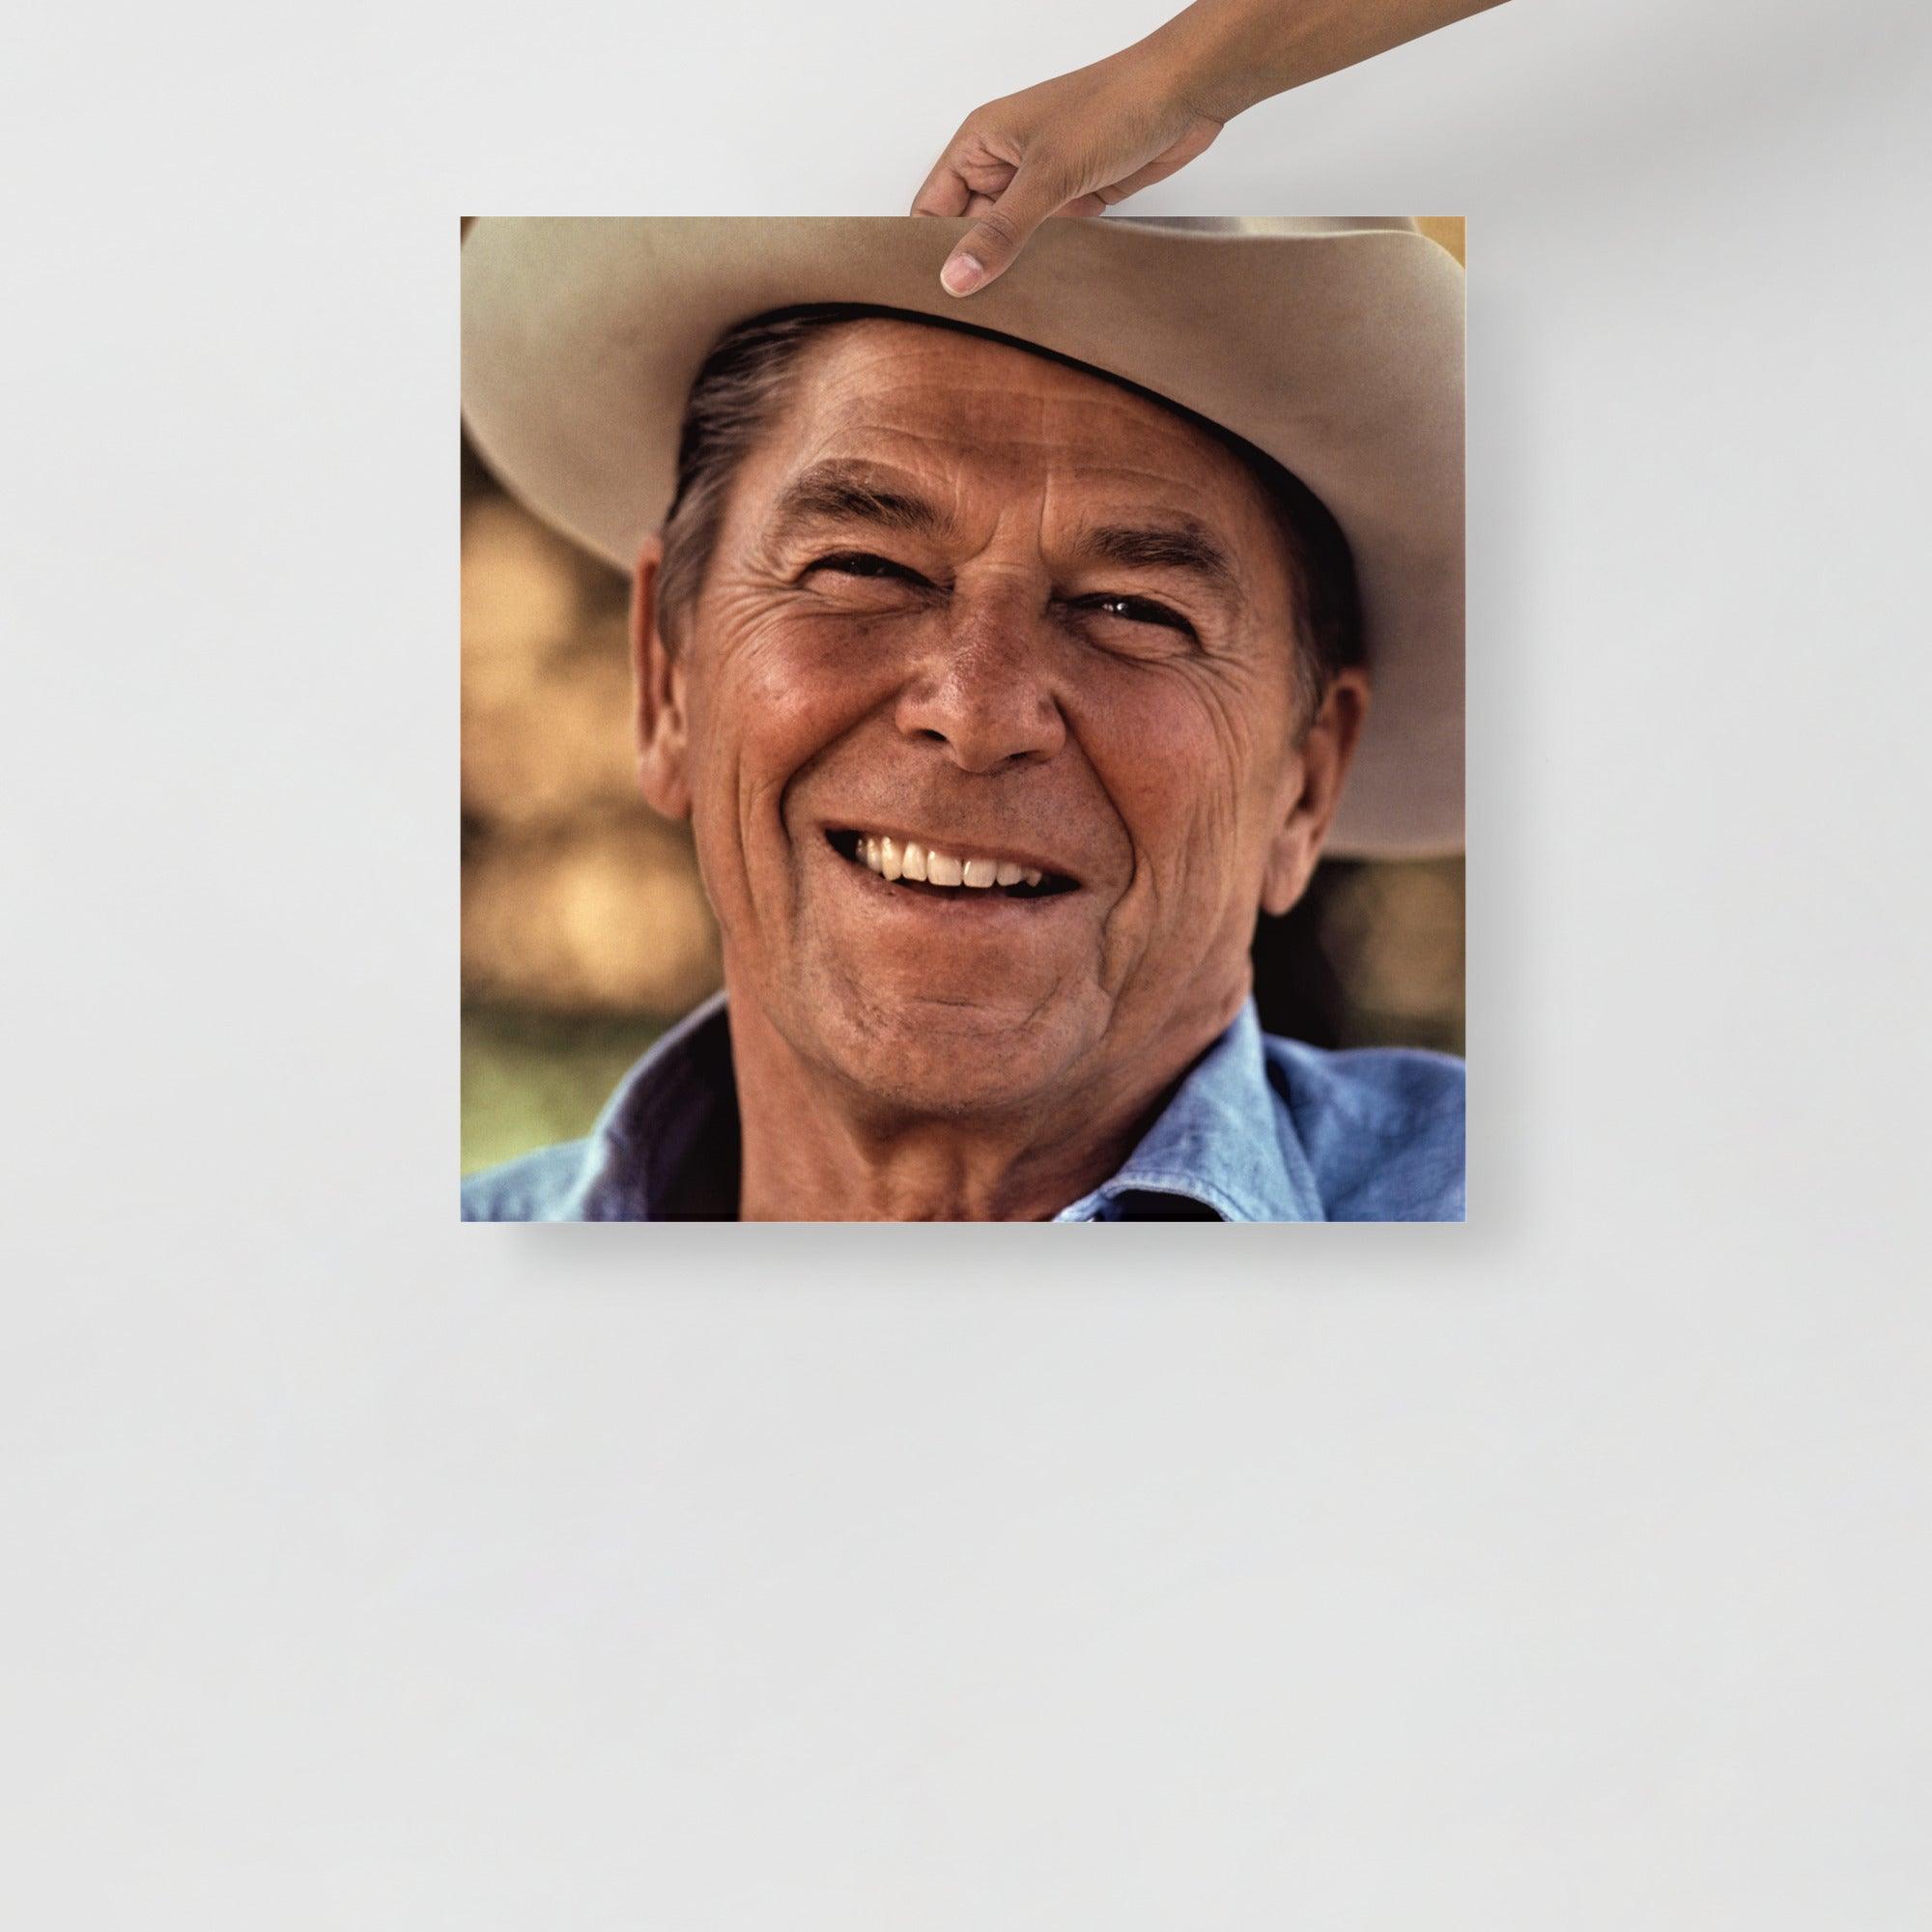 A Ronald Reagan Cowboy Hat poster on a plain backdrop in size 18x18”.